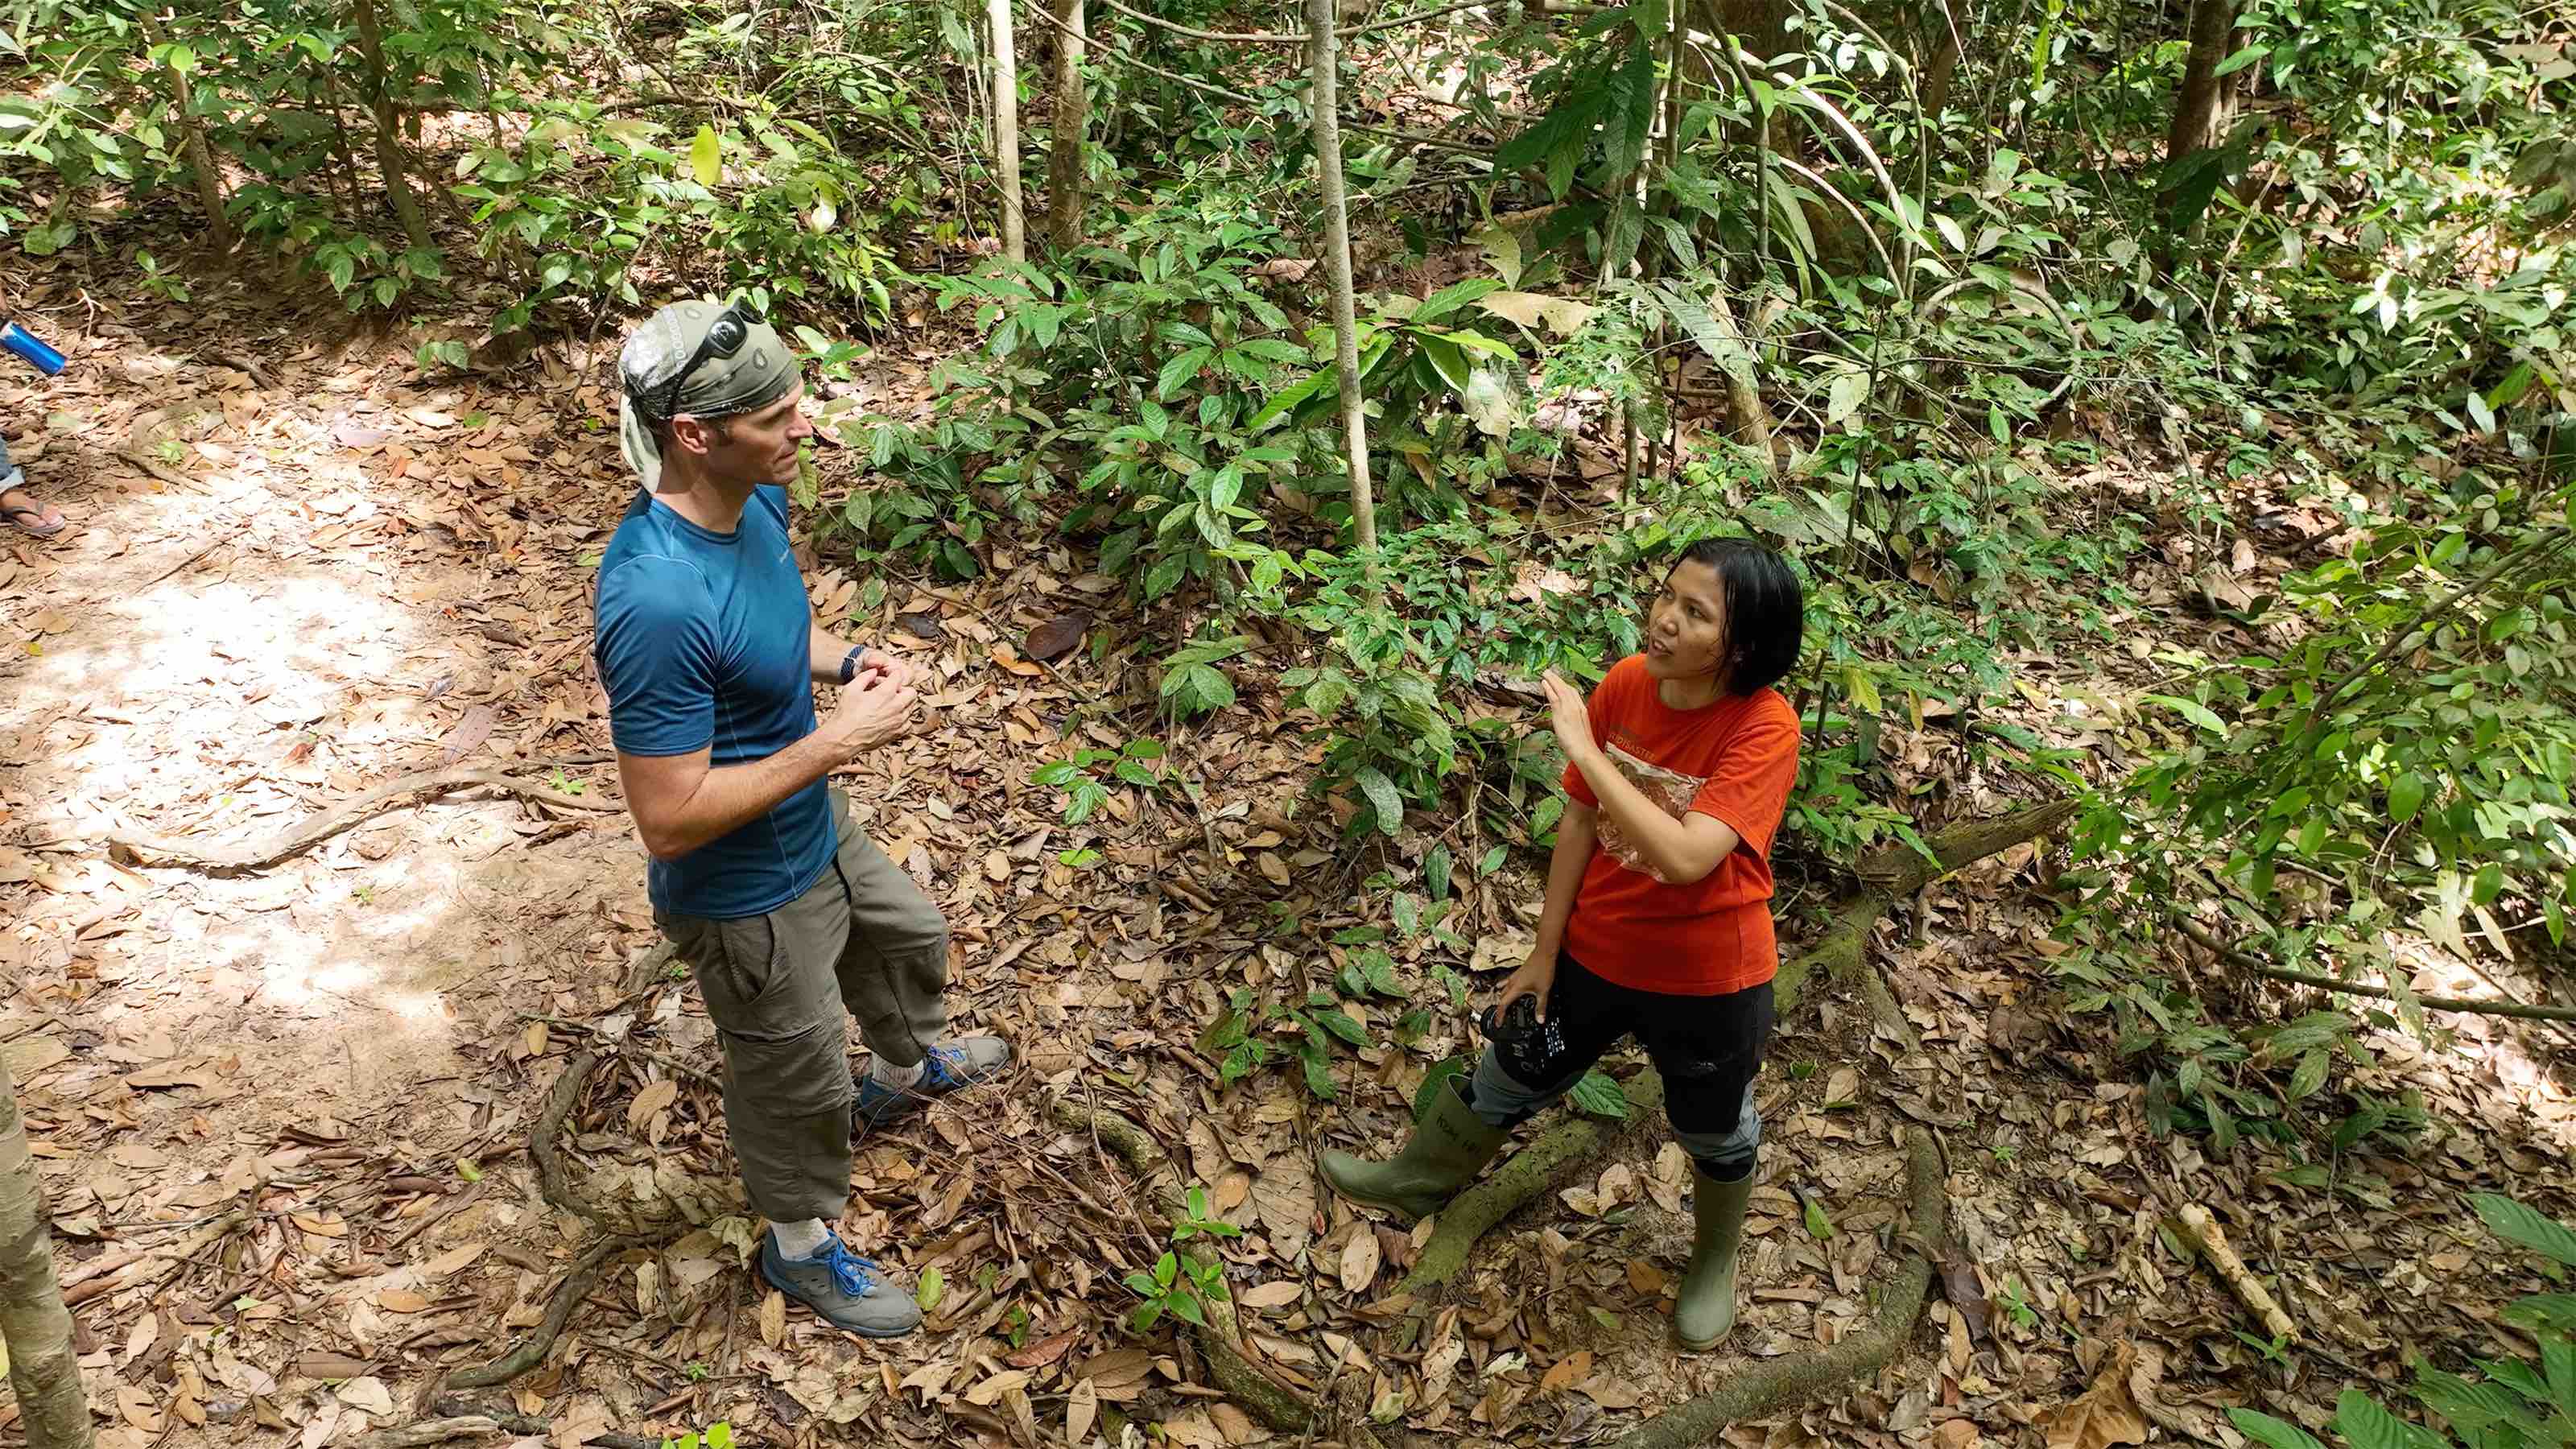 Mongabay's founder Rhett Ayers Butler reporting on the Harapan rainforest in Jambi on the island of Sumatra in Indonesia. 